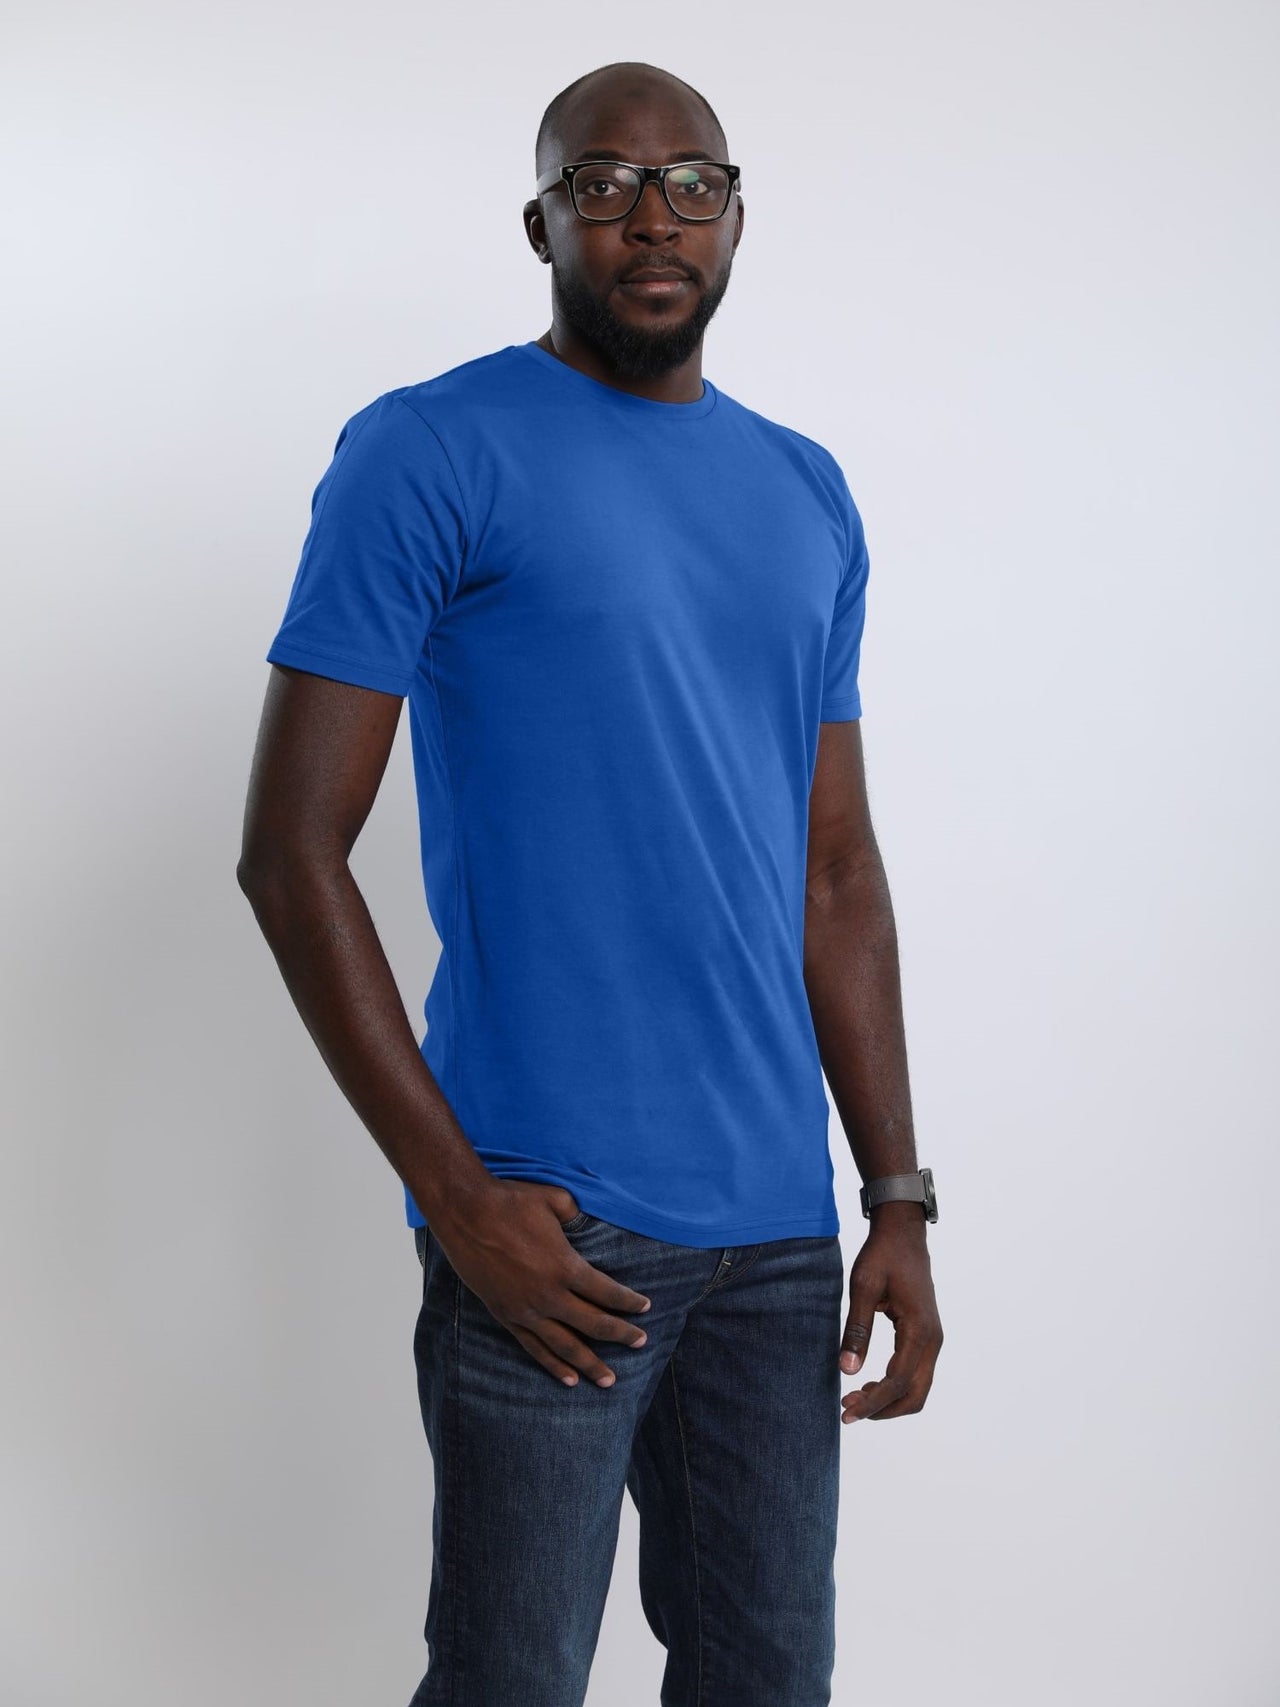 A tall and athletic guy in the studio with one hand in pocket wearing a blue large tall slim t-shirt.